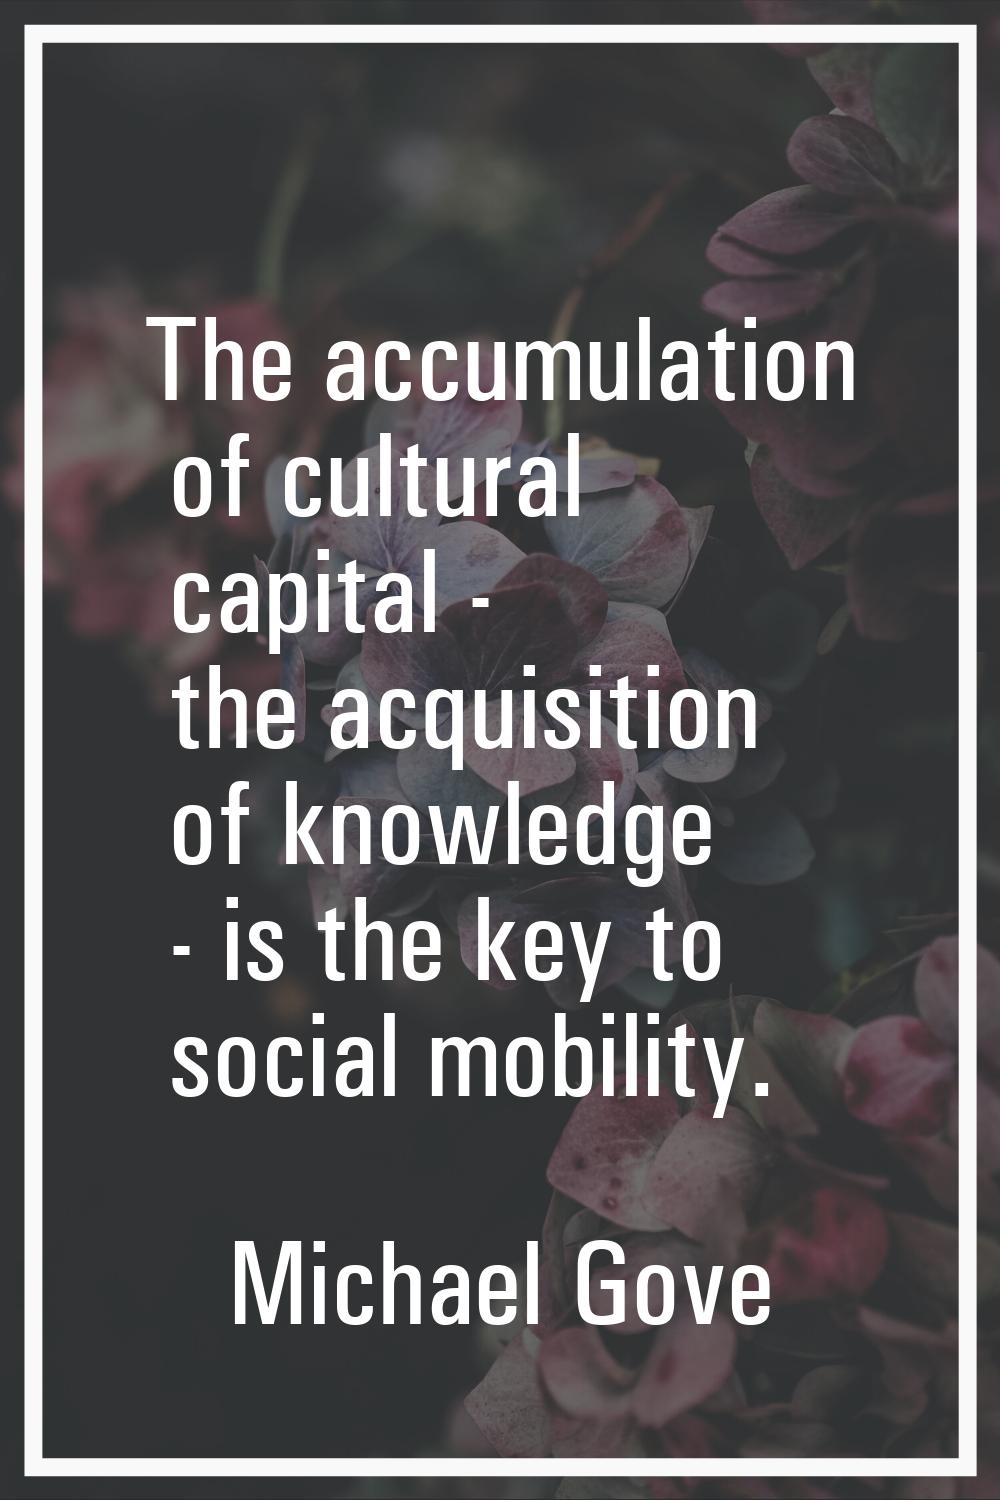 The accumulation of cultural capital - the acquisition of knowledge - is the key to social mobility